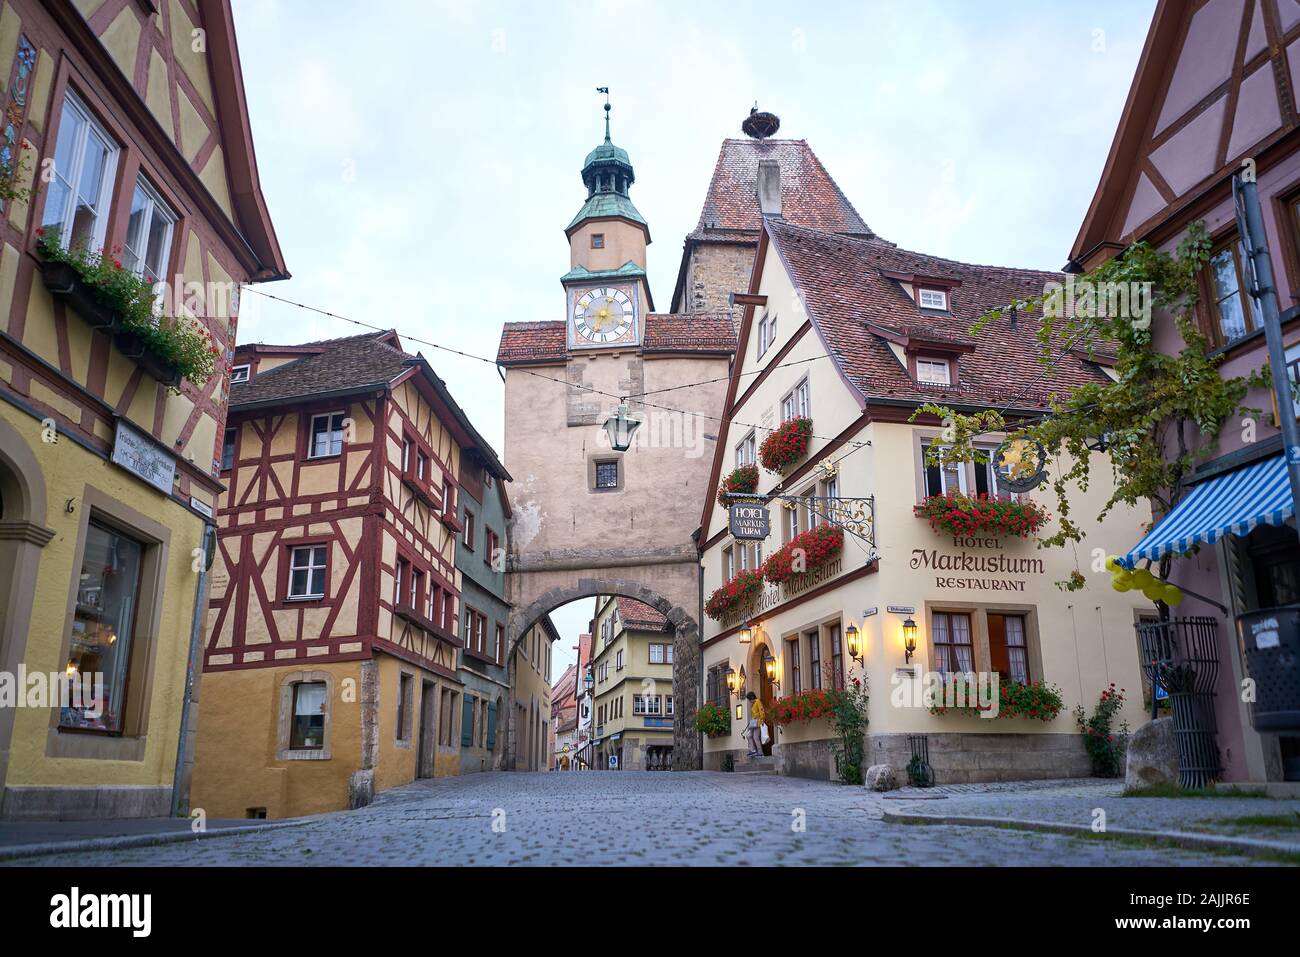 Medieval buildings and clock tower gate at the wall surrounding the old town of Rothenburg, Germany Stock Photo